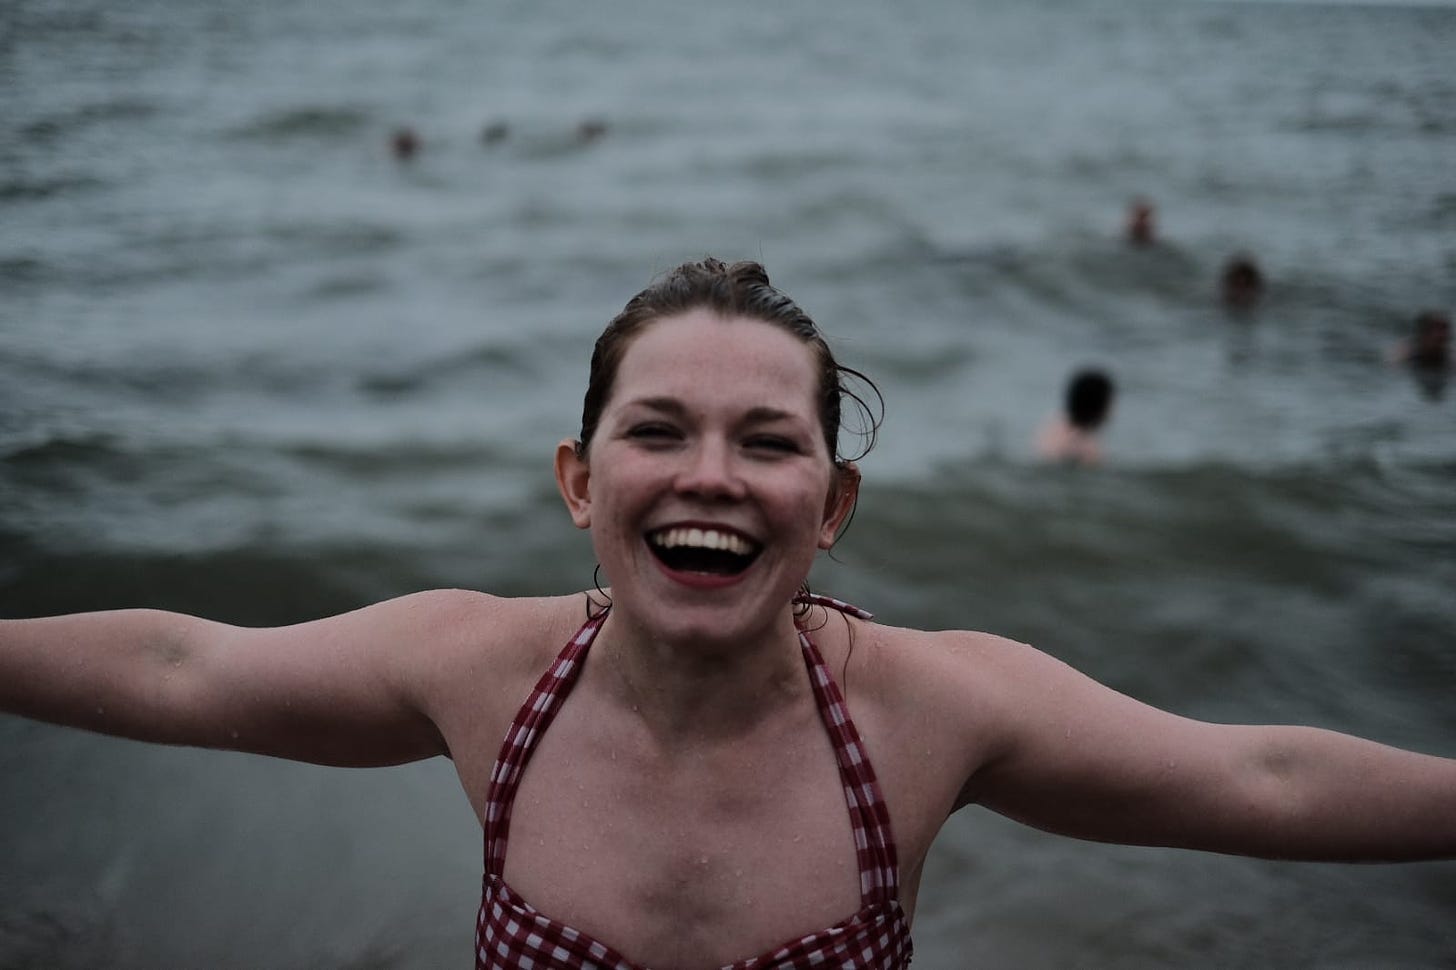 Libby walking out of the sea after a swim, arms wide open and with a big smile on her face